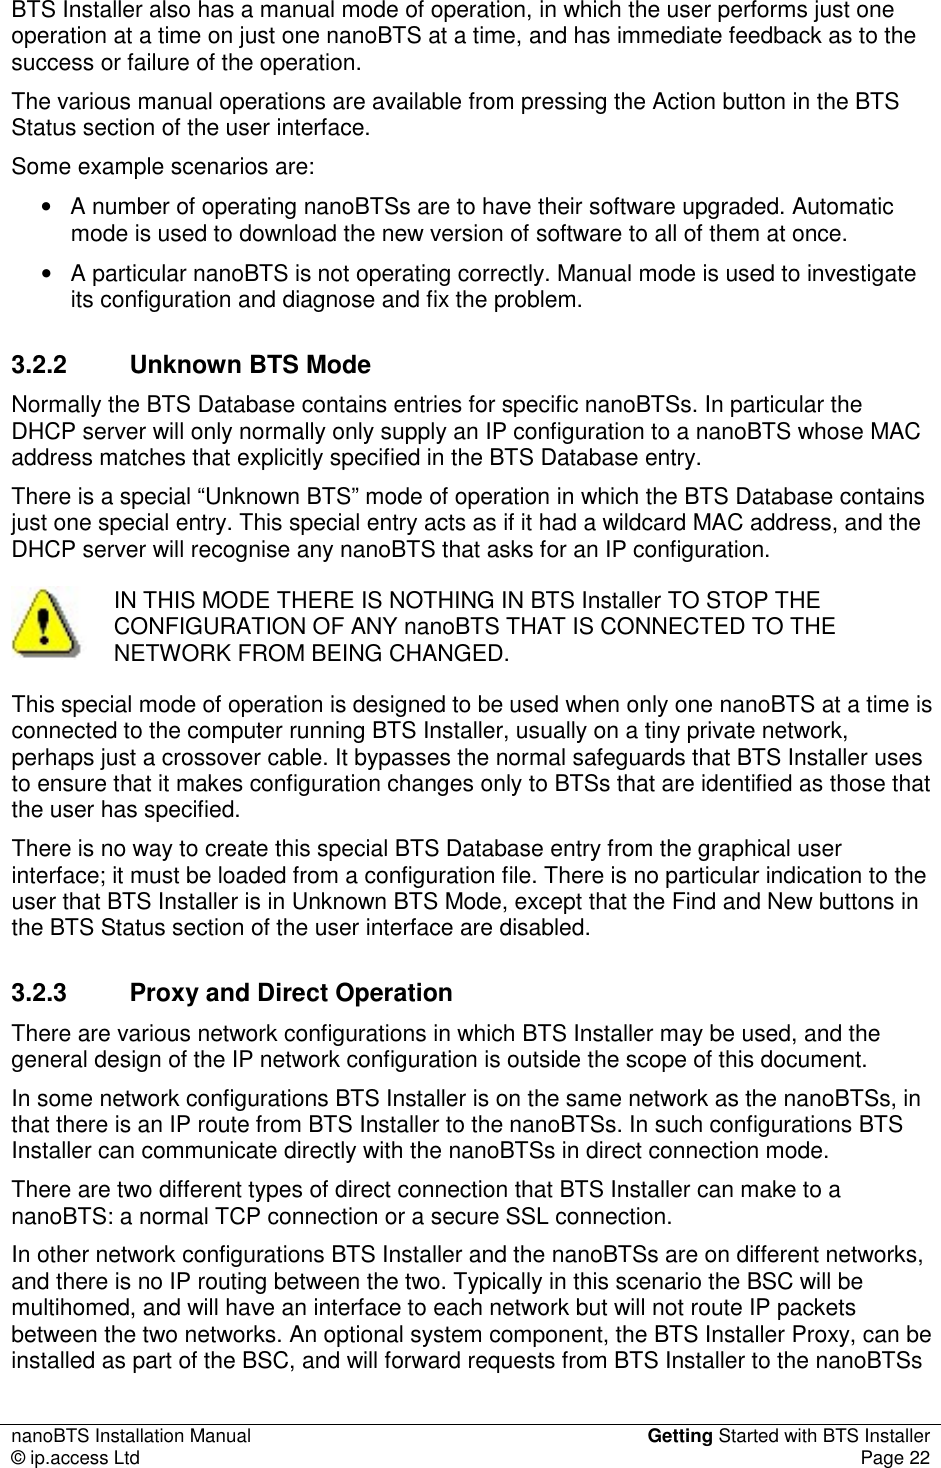 nanoBTS Installation Manual  Getting Started with BTS Installer © ip.access Ltd  Page 22  BTS Installer also has a manual mode of operation, in which the user performs just one operation at a time on just one nanoBTS at a time, and has immediate feedback as to the success or failure of the operation. The various manual operations are available from pressing the Action button in the BTS Status section of the user interface. Some example scenarios are: •  A number of operating nanoBTSs are to have their software upgraded. Automatic mode is used to download the new version of software to all of them at once. •  A particular nanoBTS is not operating correctly. Manual mode is used to investigate its configuration and diagnose and fix the problem. 3.2.2  Unknown BTS Mode Normally the BTS Database contains entries for specific nanoBTSs. In particular the DHCP server will only normally only supply an IP configuration to a nanoBTS whose MAC address matches that explicitly specified in the BTS Database entry. There is a special “Unknown BTS” mode of operation in which the BTS Database contains just one special entry. This special entry acts as if it had a wildcard MAC address, and the DHCP server will recognise any nanoBTS that asks for an IP configuration.     IN THIS MODE THERE IS NOTHING IN BTS Installer TO STOP THE CONFIGURATION OF ANY nanoBTS THAT IS CONNECTED TO THE NETWORK FROM BEING CHANGED. This special mode of operation is designed to be used when only one nanoBTS at a time is connected to the computer running BTS Installer, usually on a tiny private network, perhaps just a crossover cable. It bypasses the normal safeguards that BTS Installer uses to ensure that it makes configuration changes only to BTSs that are identified as those that the user has specified. There is no way to create this special BTS Database entry from the graphical user interface; it must be loaded from a configuration file. There is no particular indication to the user that BTS Installer is in Unknown BTS Mode, except that the Find and New buttons in the BTS Status section of the user interface are disabled. 3.2.3  Proxy and Direct Operation There are various network configurations in which BTS Installer may be used, and the general design of the IP network configuration is outside the scope of this document. In some network configurations BTS Installer is on the same network as the nanoBTSs, in that there is an IP route from BTS Installer to the nanoBTSs. In such configurations BTS Installer can communicate directly with the nanoBTSs in direct connection mode. There are two different types of direct connection that BTS Installer can make to a nanoBTS: a normal TCP connection or a secure SSL connection. In other network configurations BTS Installer and the nanoBTSs are on different networks, and there is no IP routing between the two. Typically in this scenario the BSC will be multihomed, and will have an interface to each network but will not route IP packets between the two networks. An optional system component, the BTS Installer Proxy, can be installed as part of the BSC, and will forward requests from BTS Installer to the nanoBTSs 